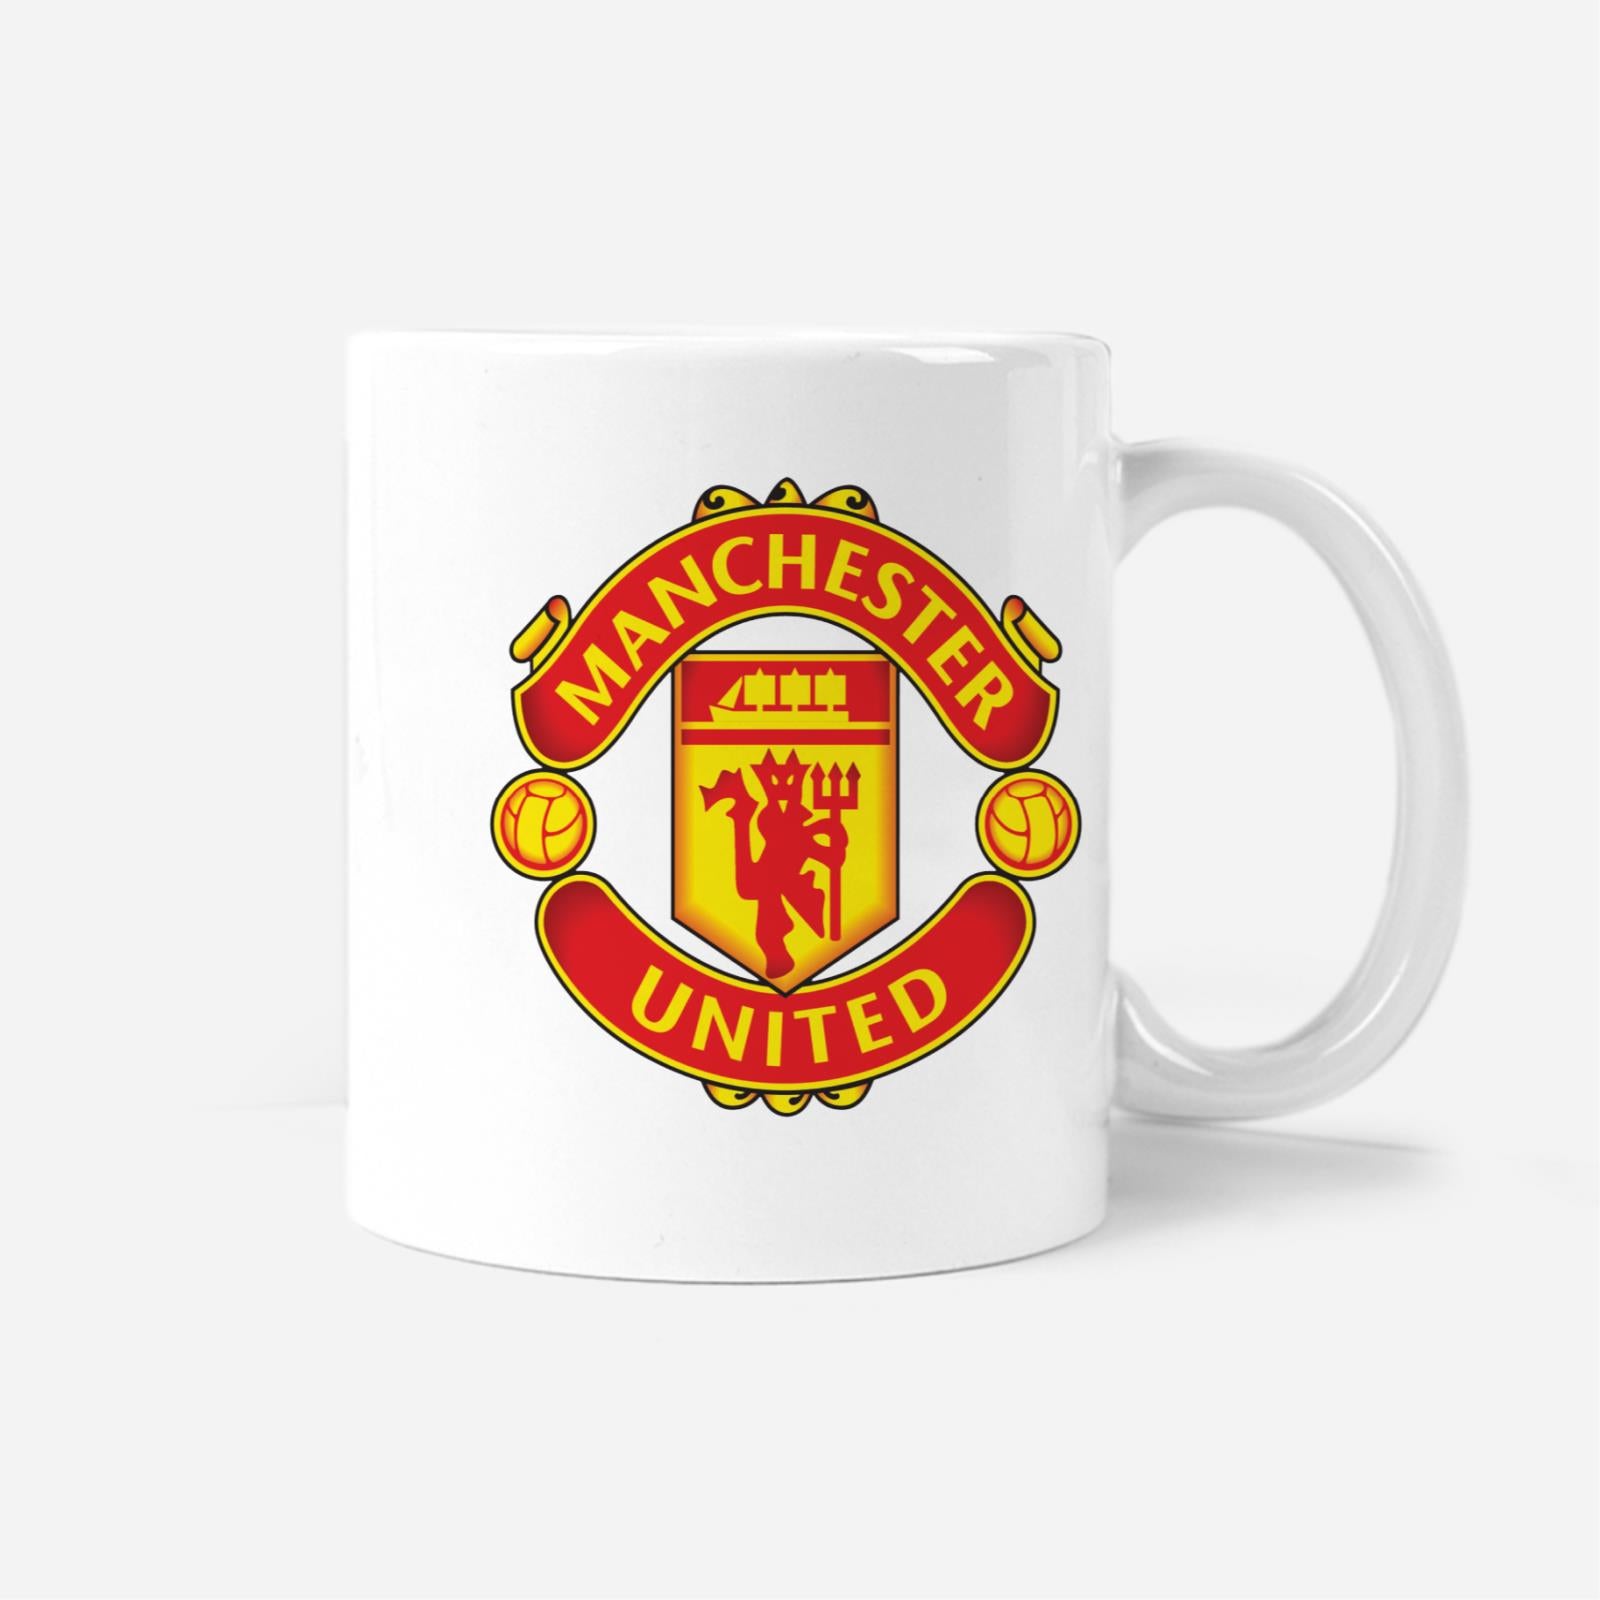 Manchester United Football Fan Mug Personalizable with Name and Number